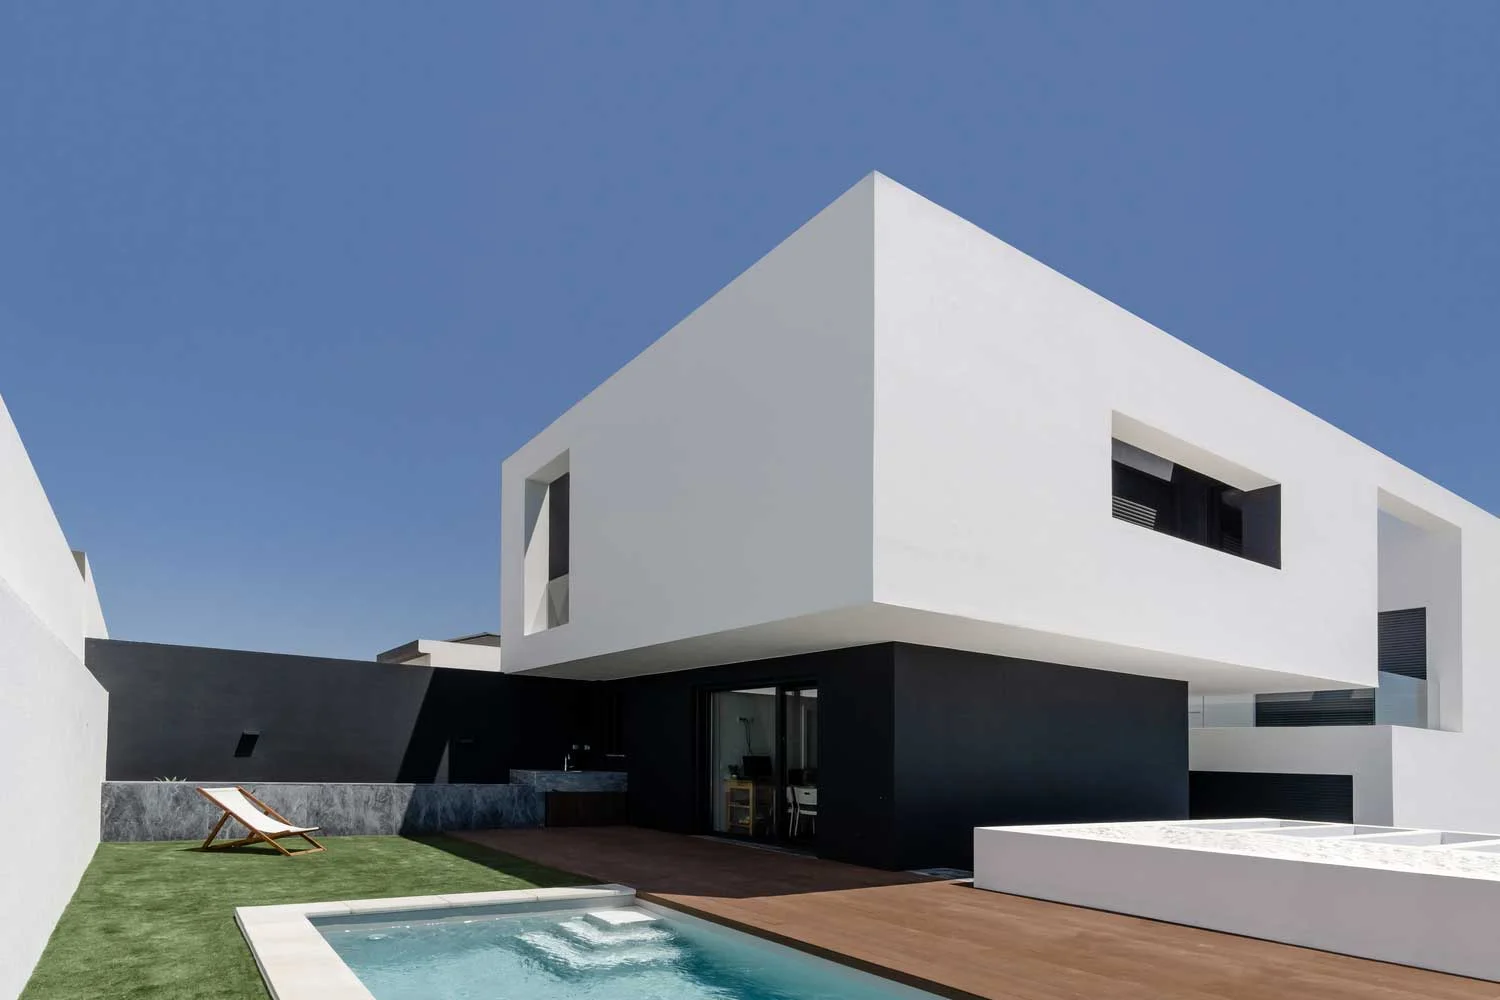 Black and White Interior & Exterior Two-Story House Design / ARN ...